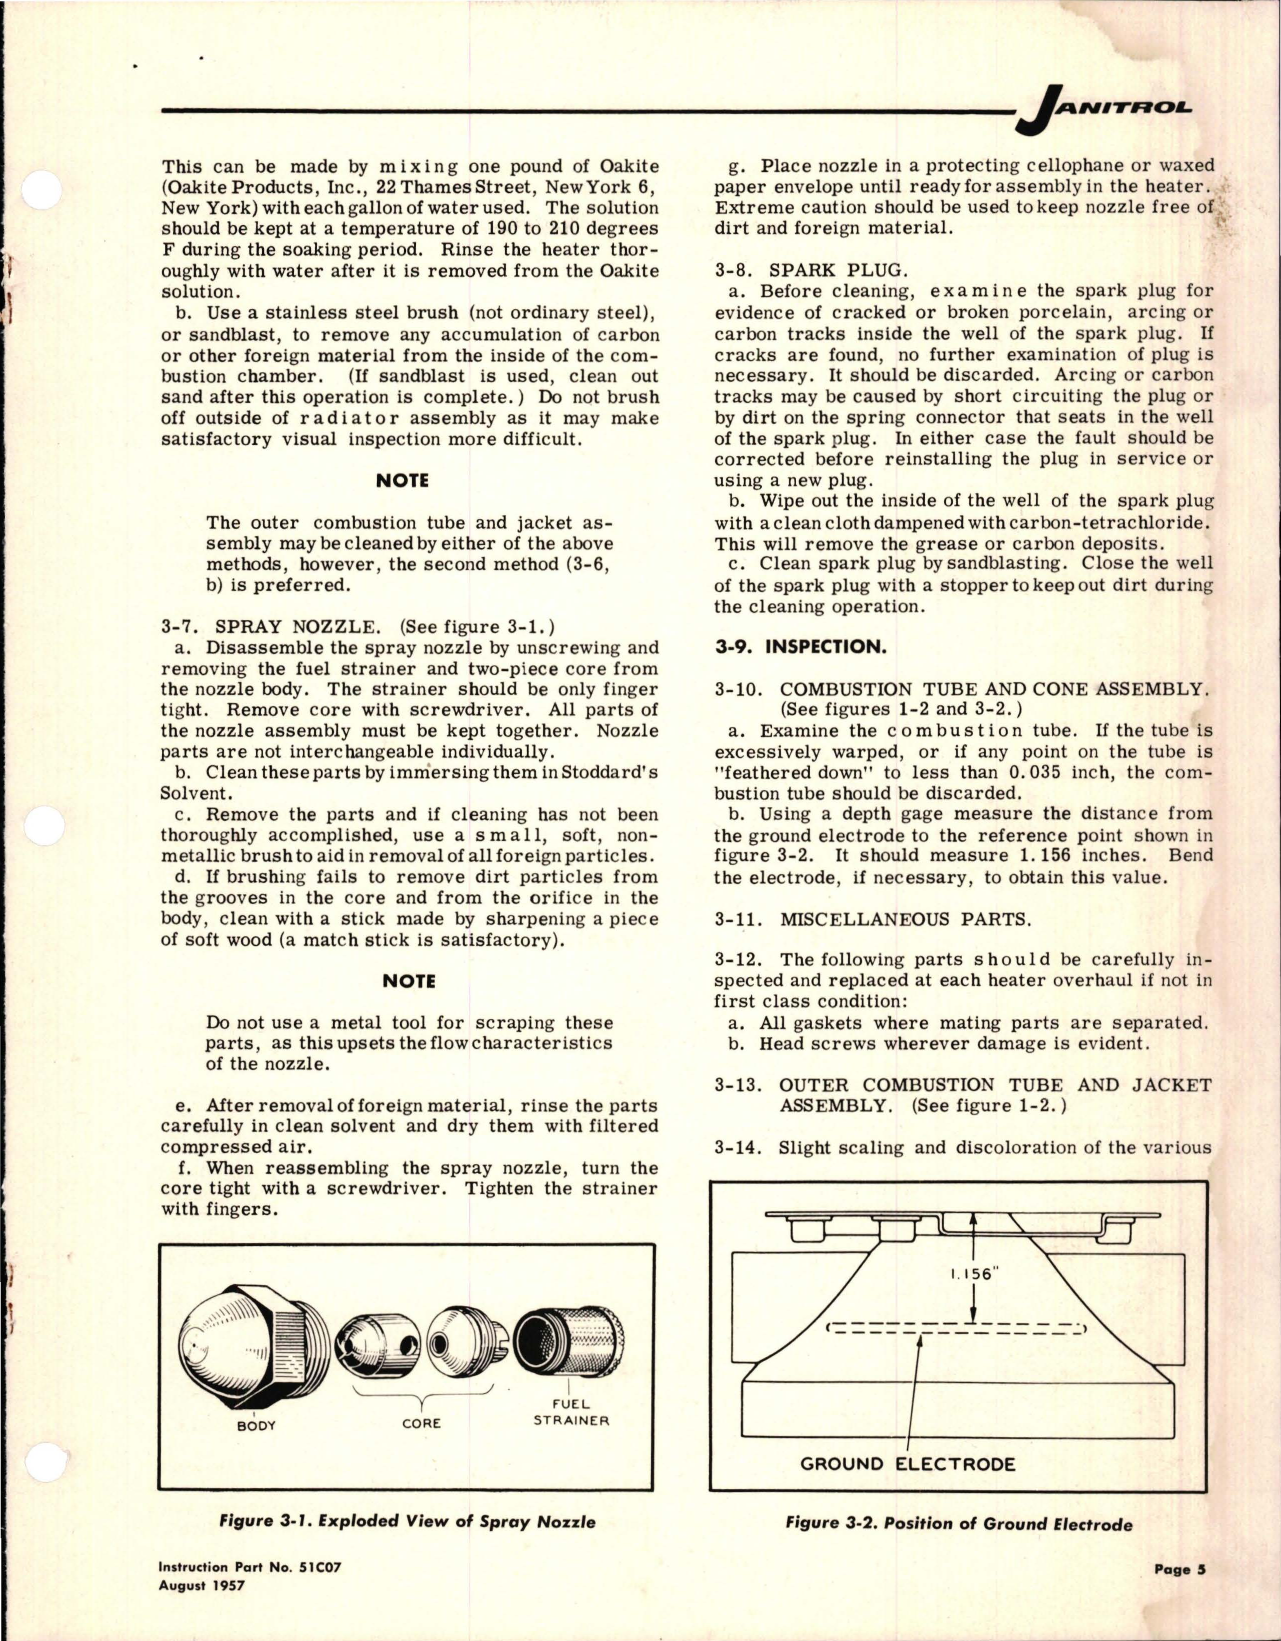 Sample page 5 from AirCorps Library document: Maintenance Instructions for Aircraft Heaters - S-200 Series - Parts 49C65, A49C65, and B49C65